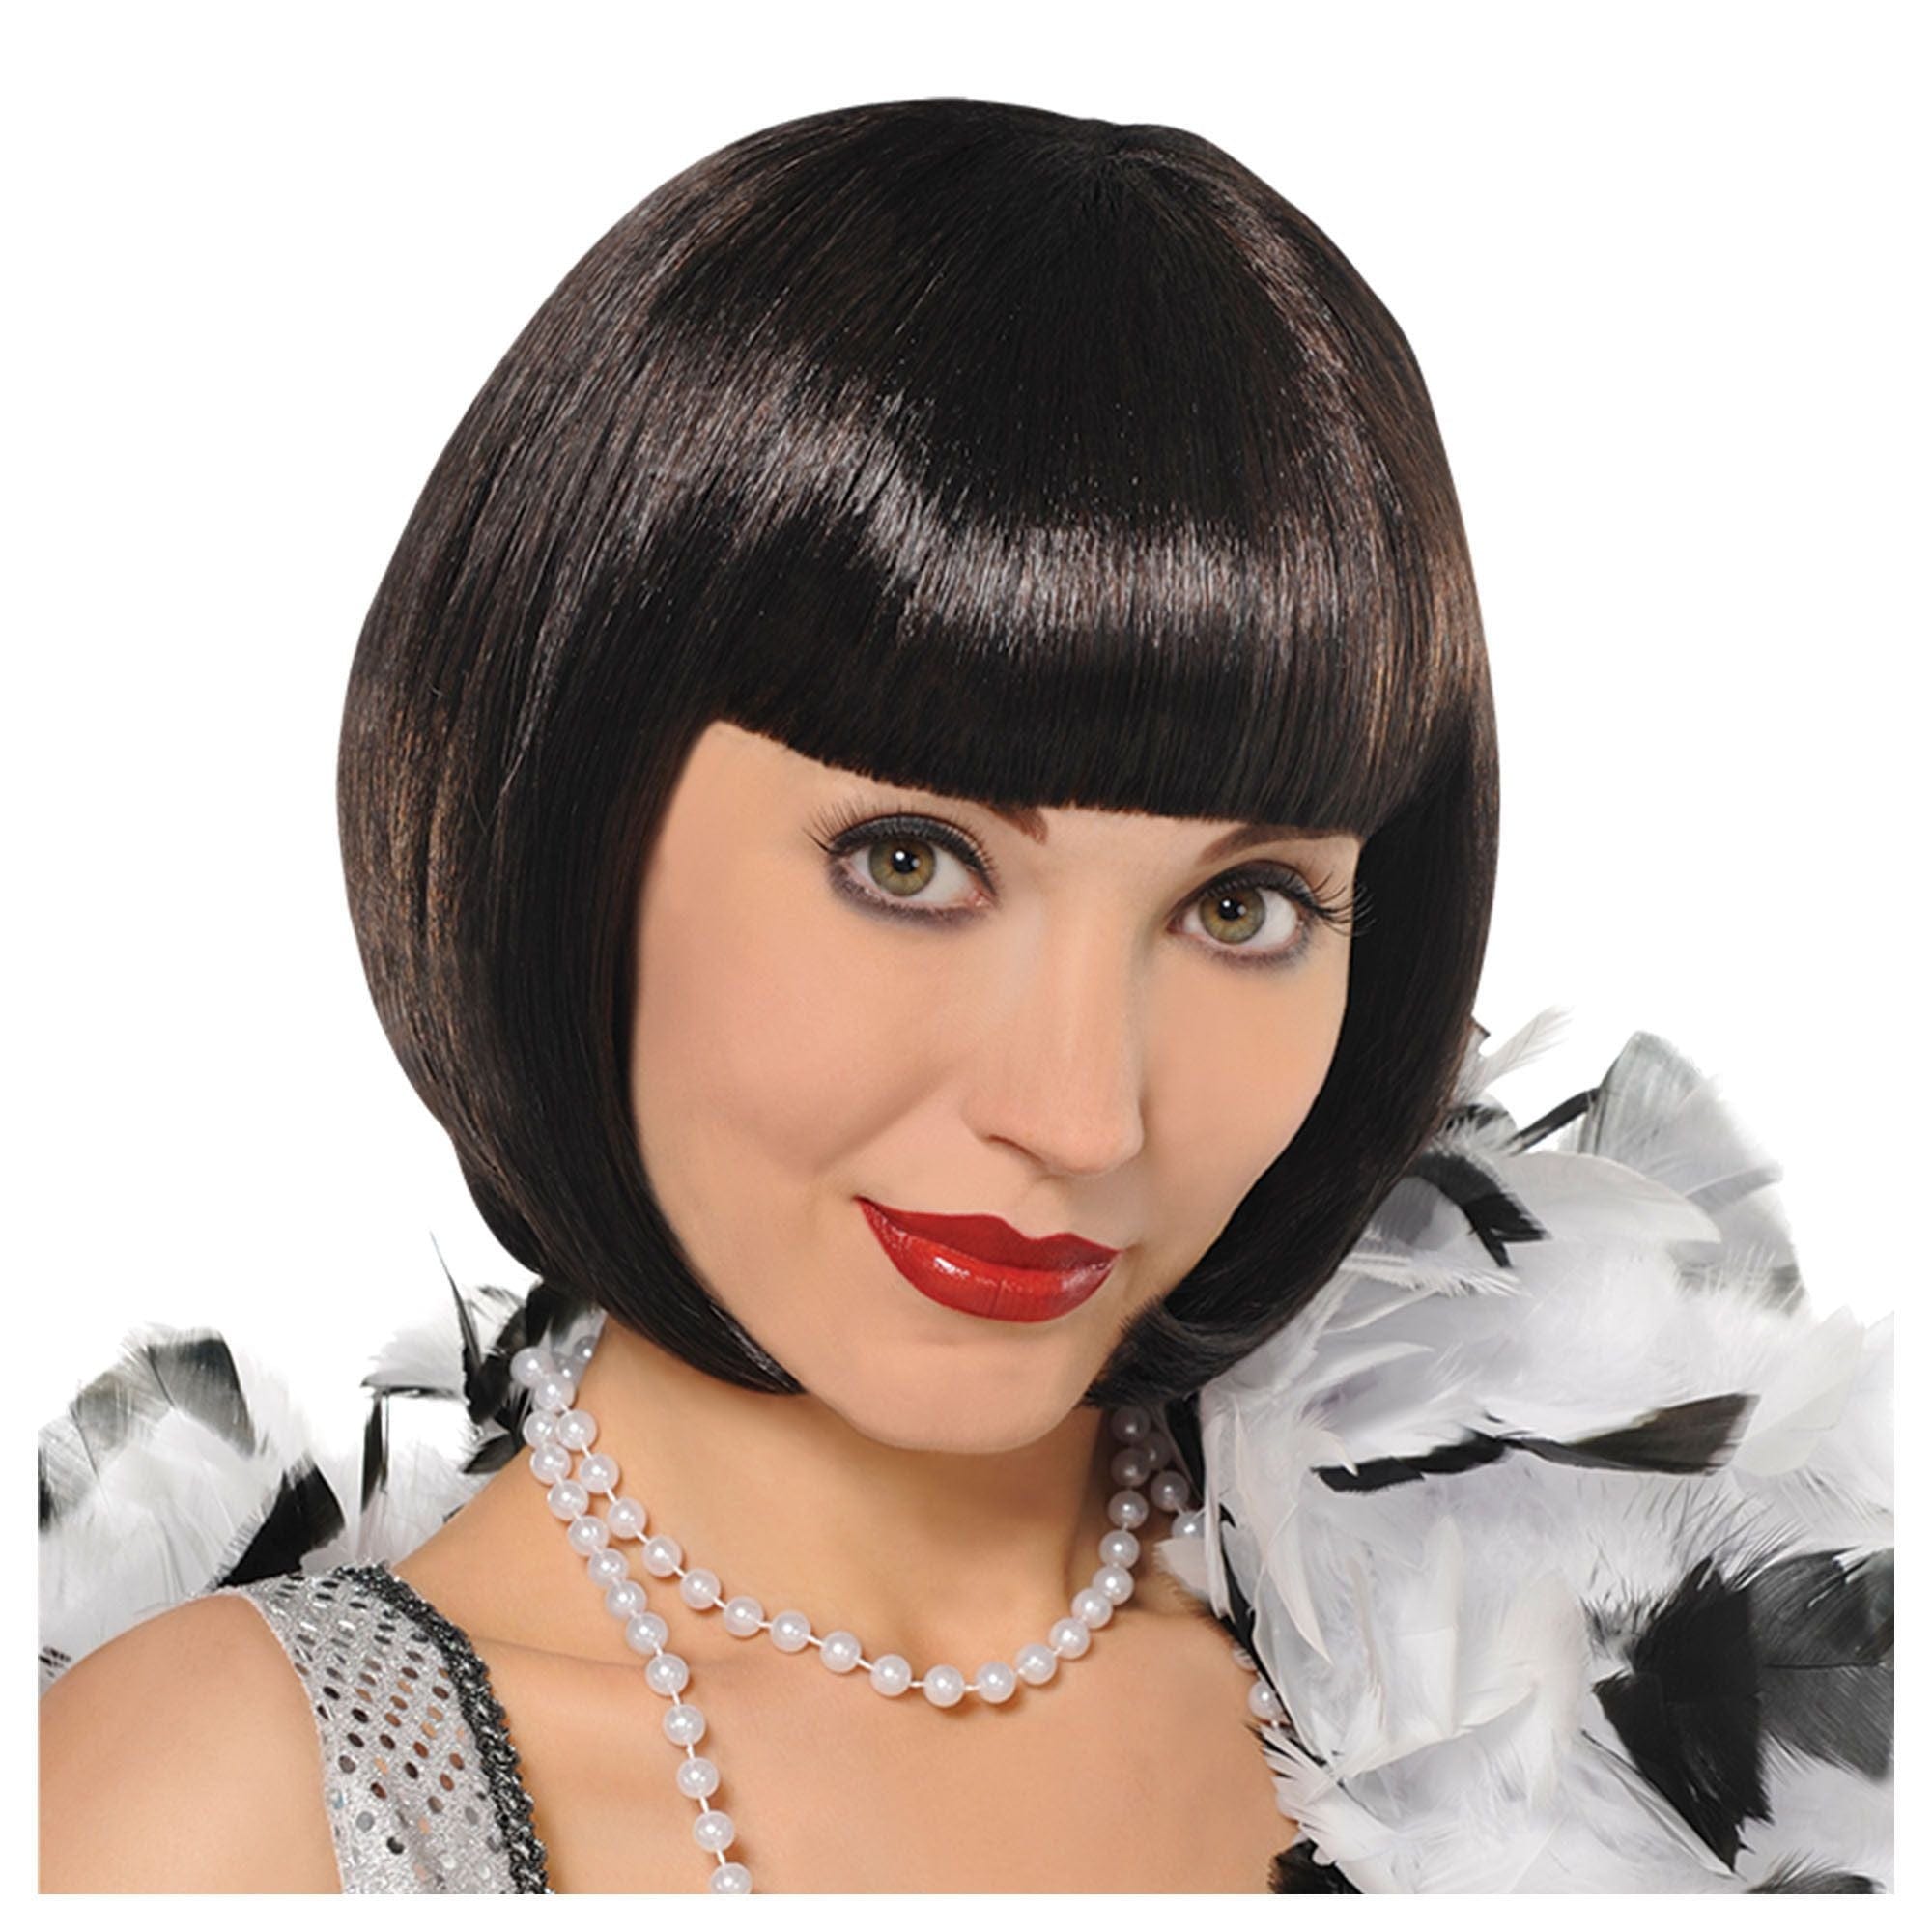 Amscan COSTUMES: WIGS Flapper Wig